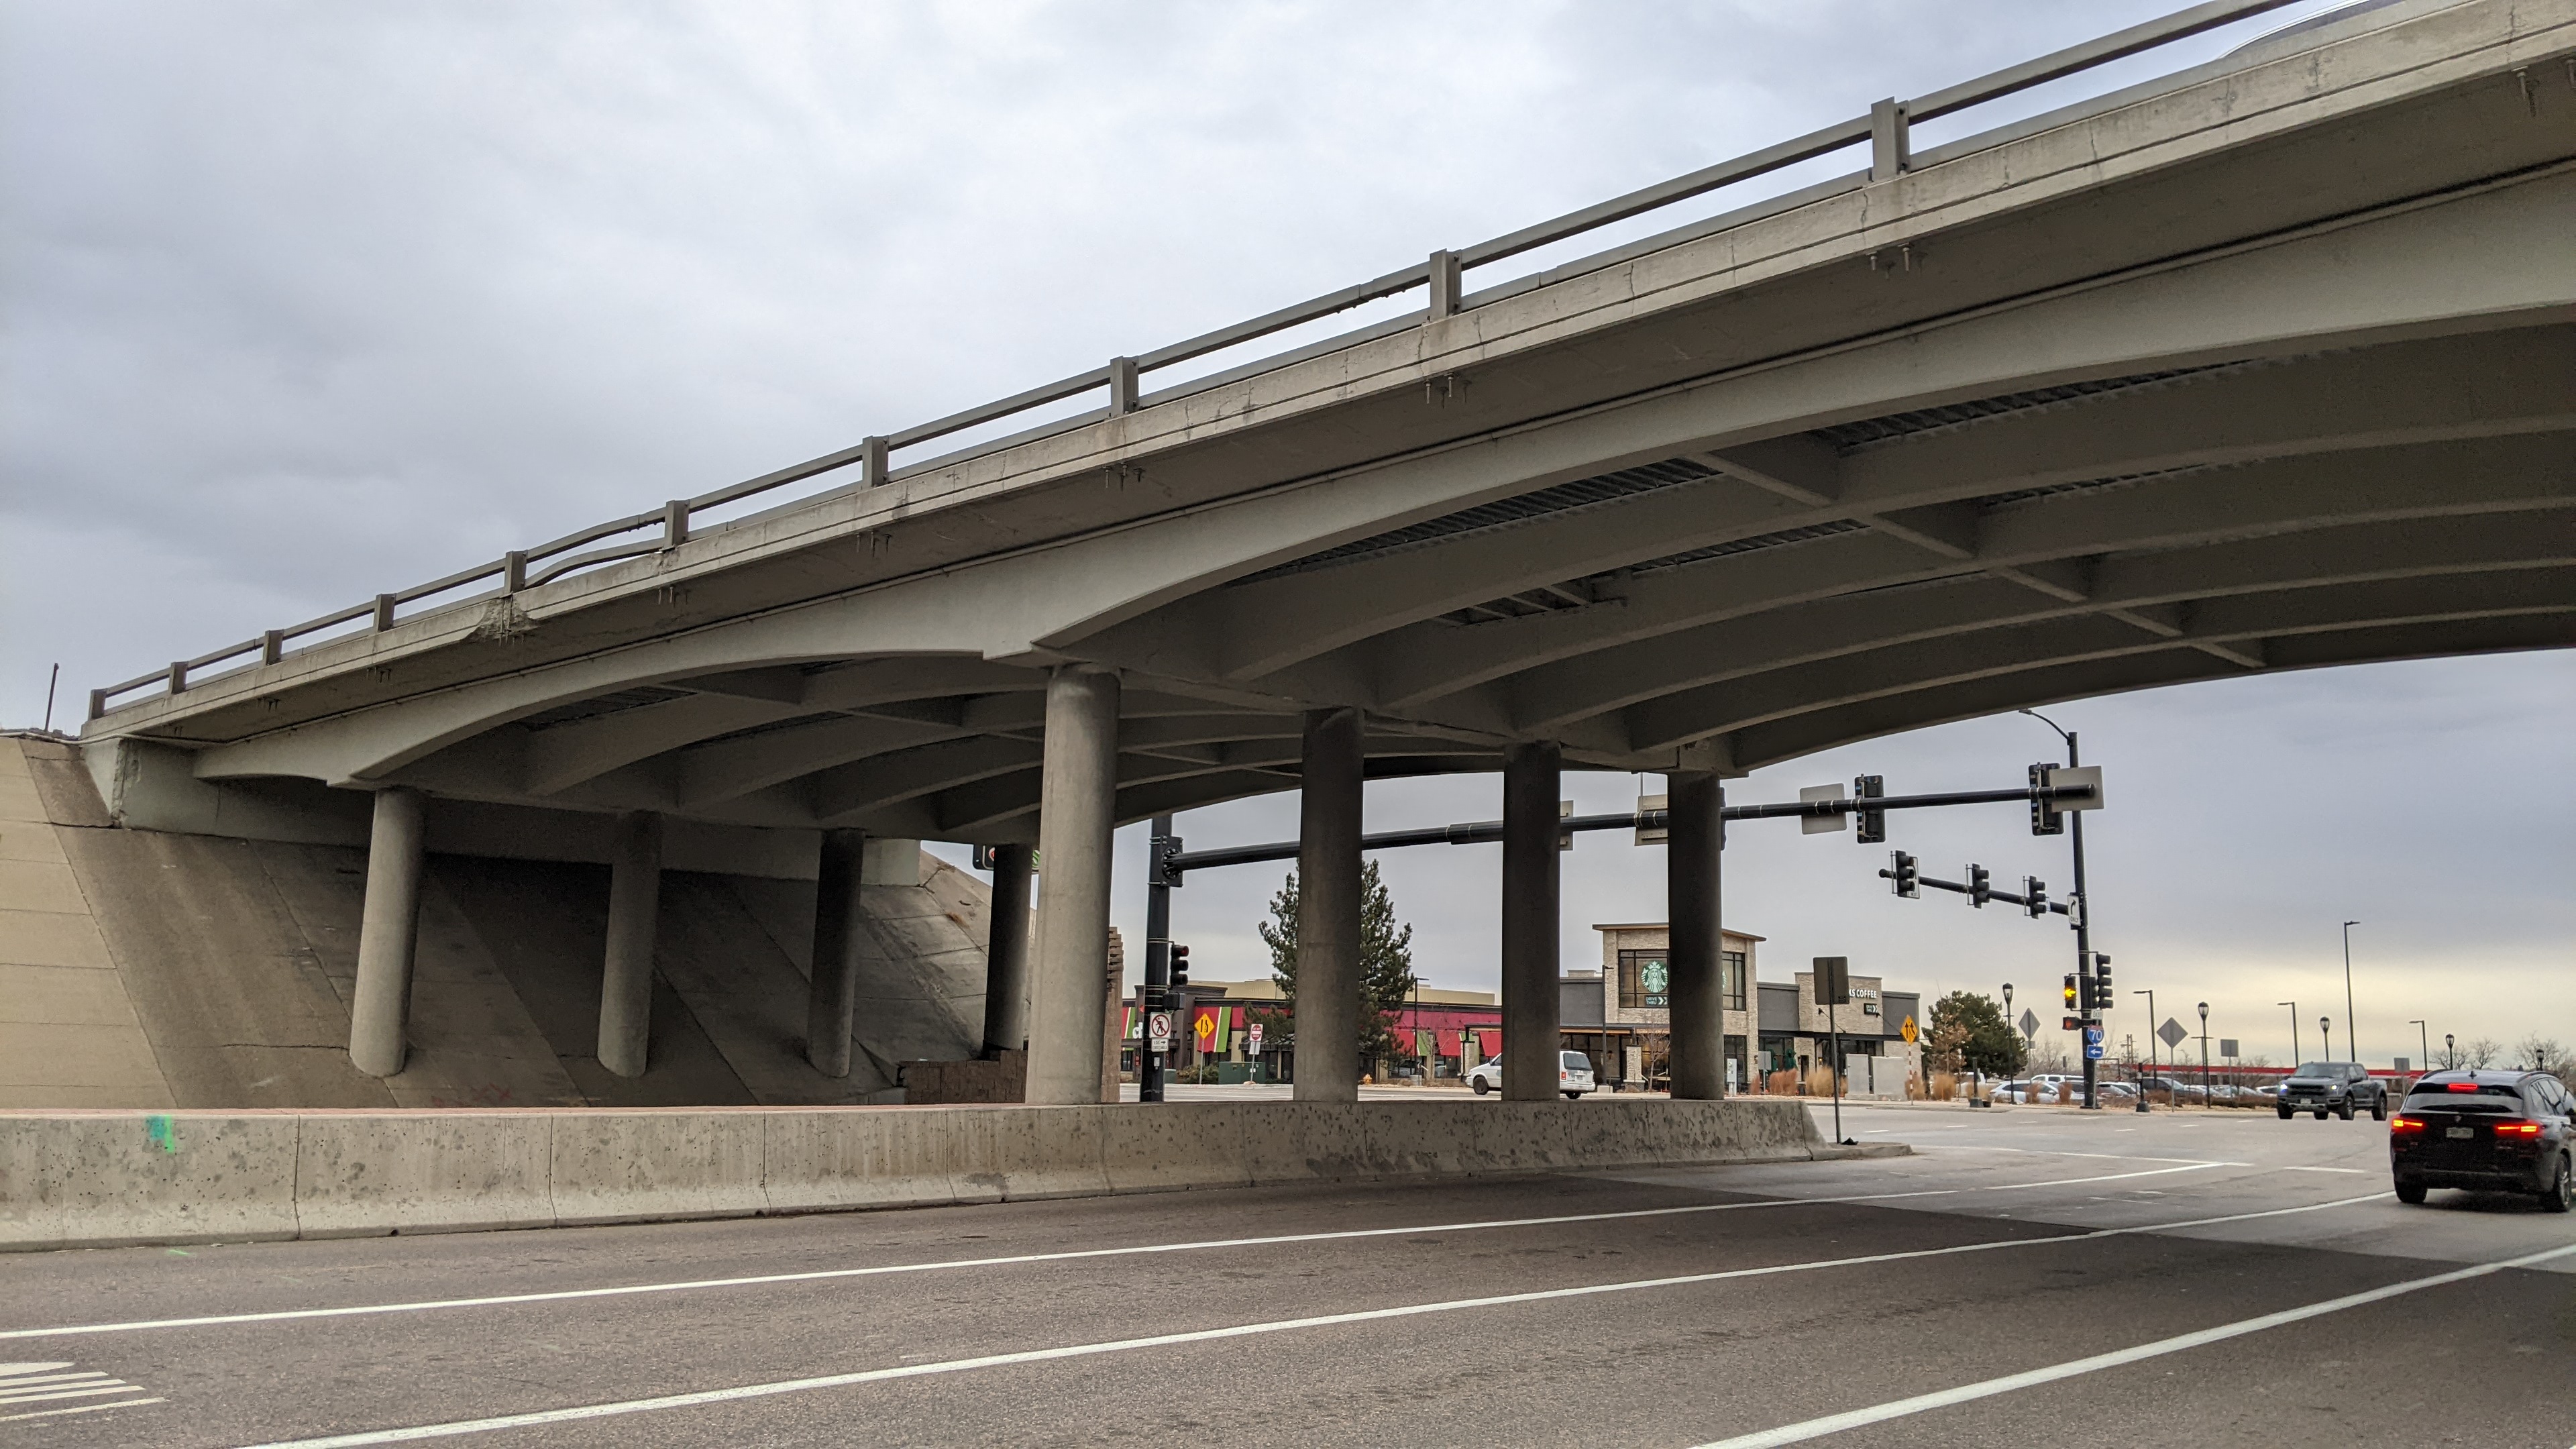 westbound bridge I-70 over 32nd Avenue - current condition.jpg detail image